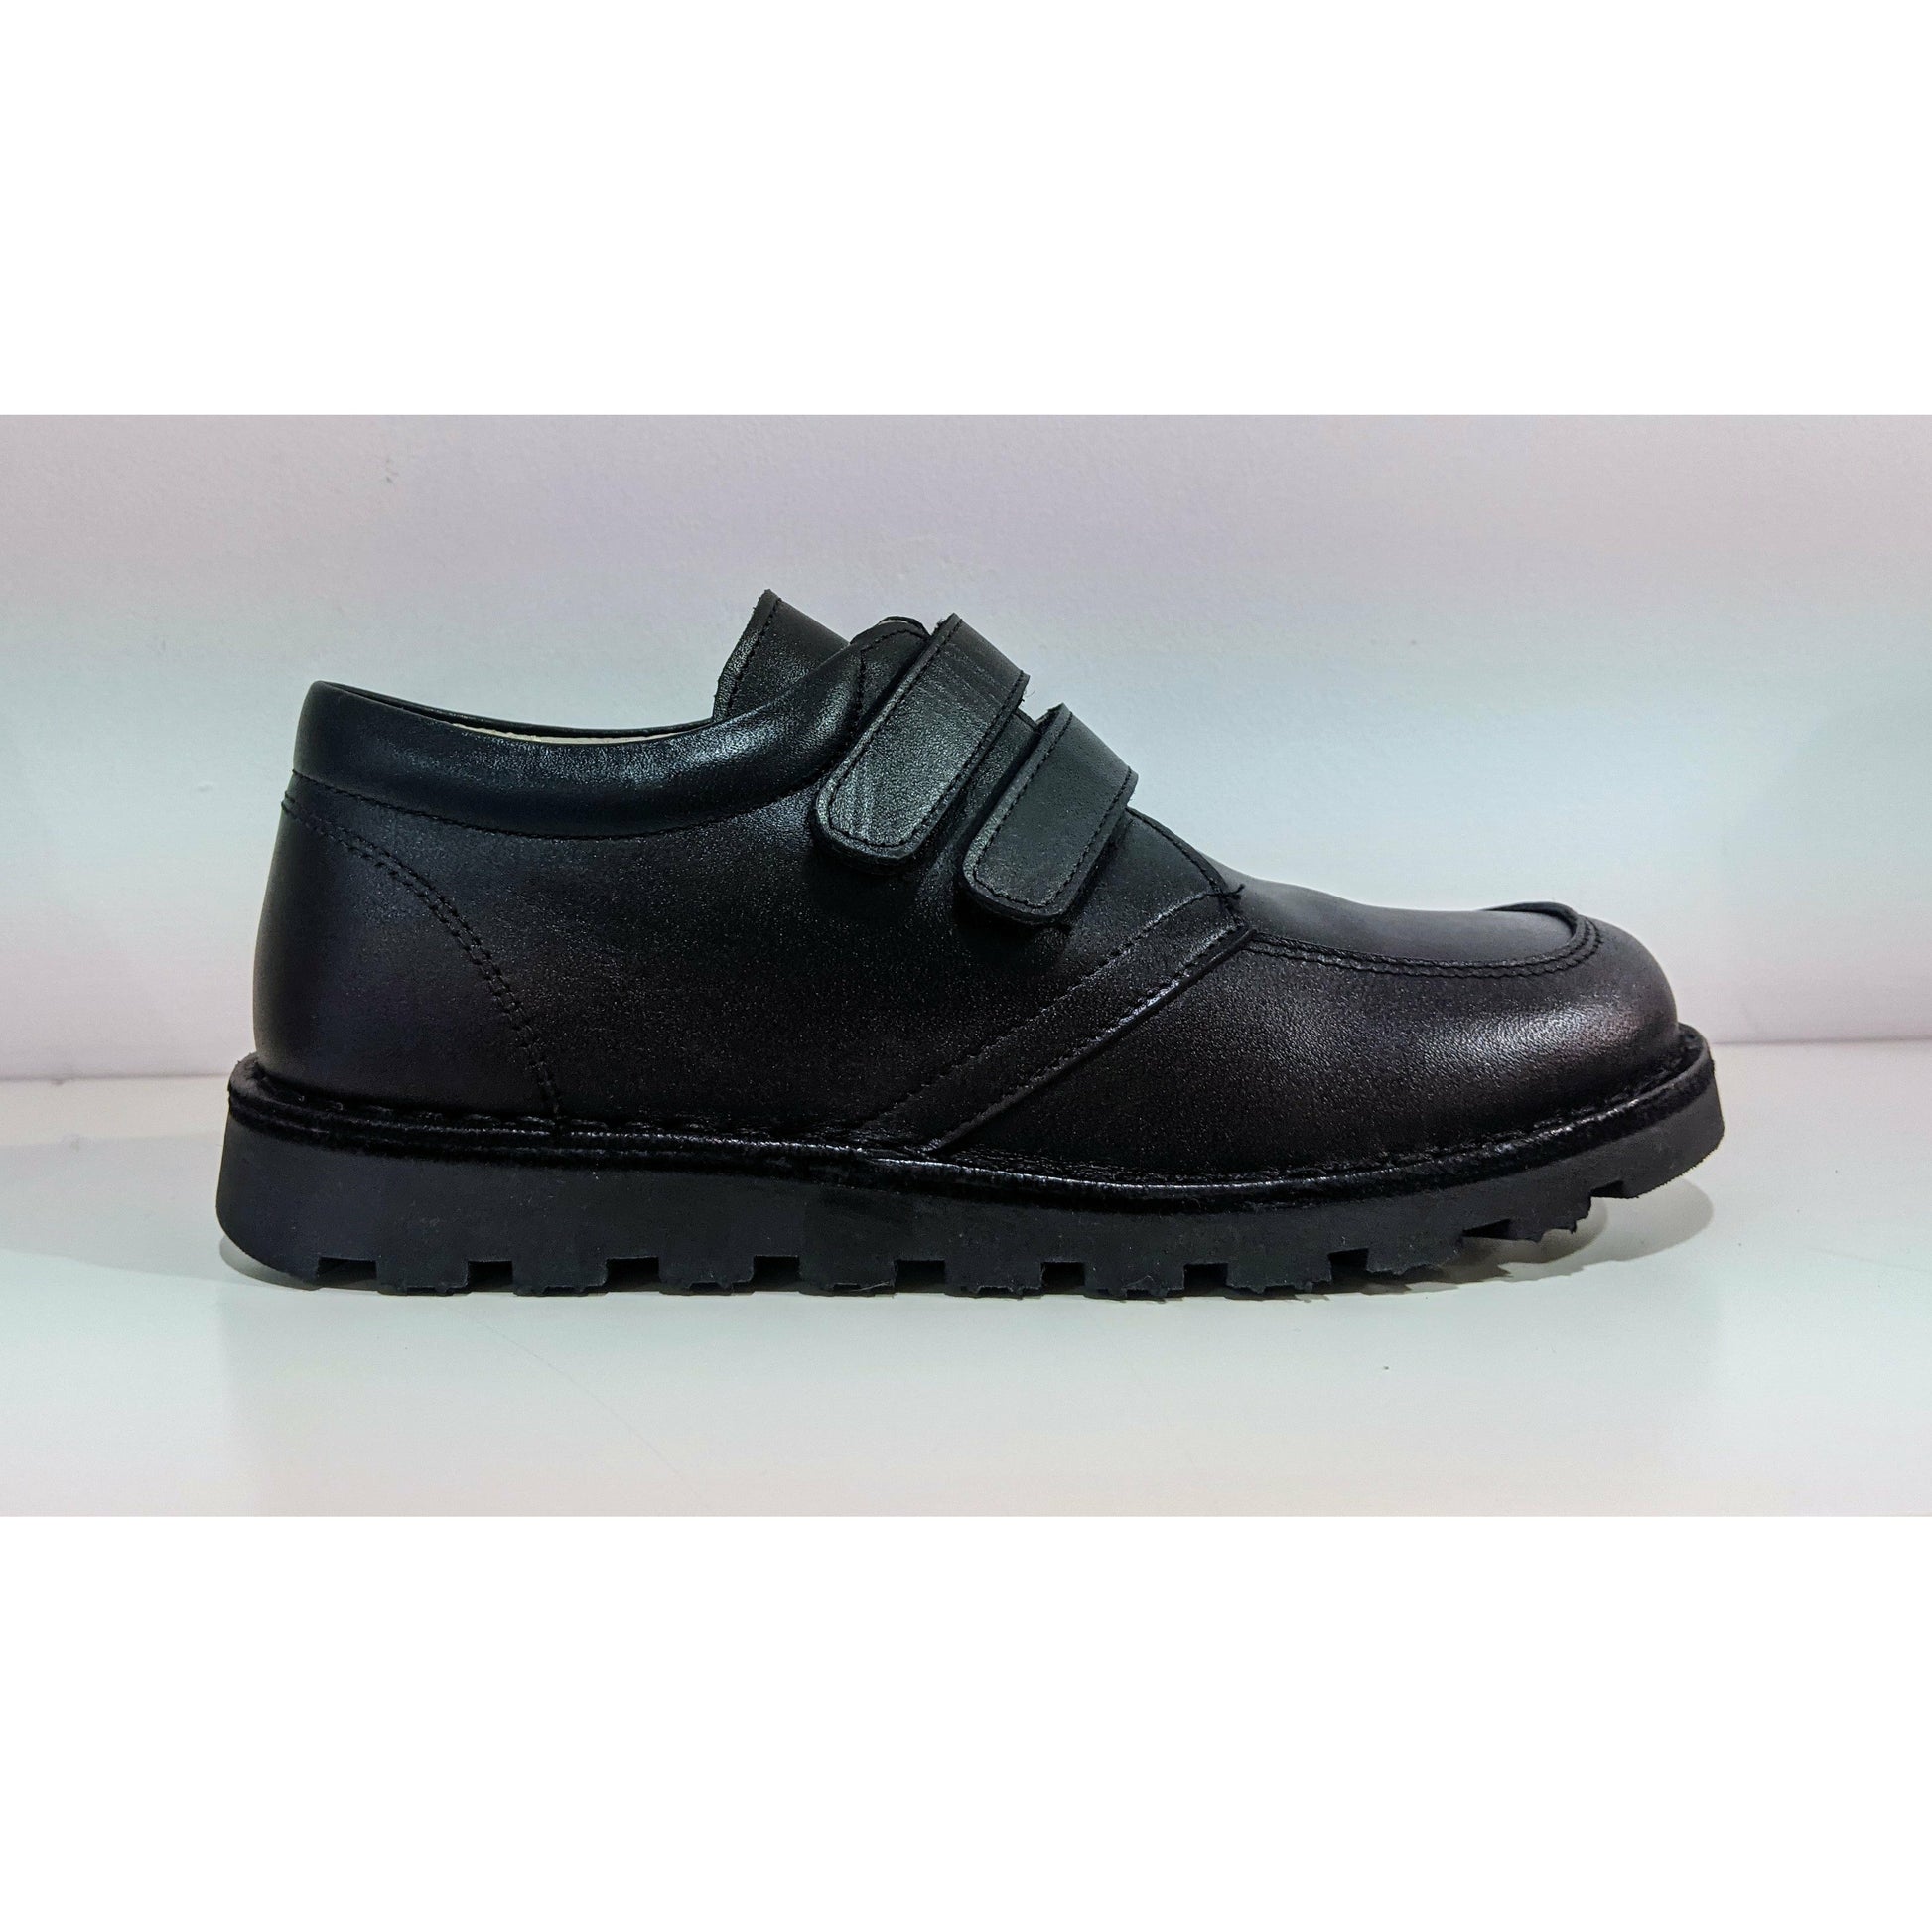 A boys smart school shoe by Petasil, style Celestino, in black with double velcro fastening. Right side view.